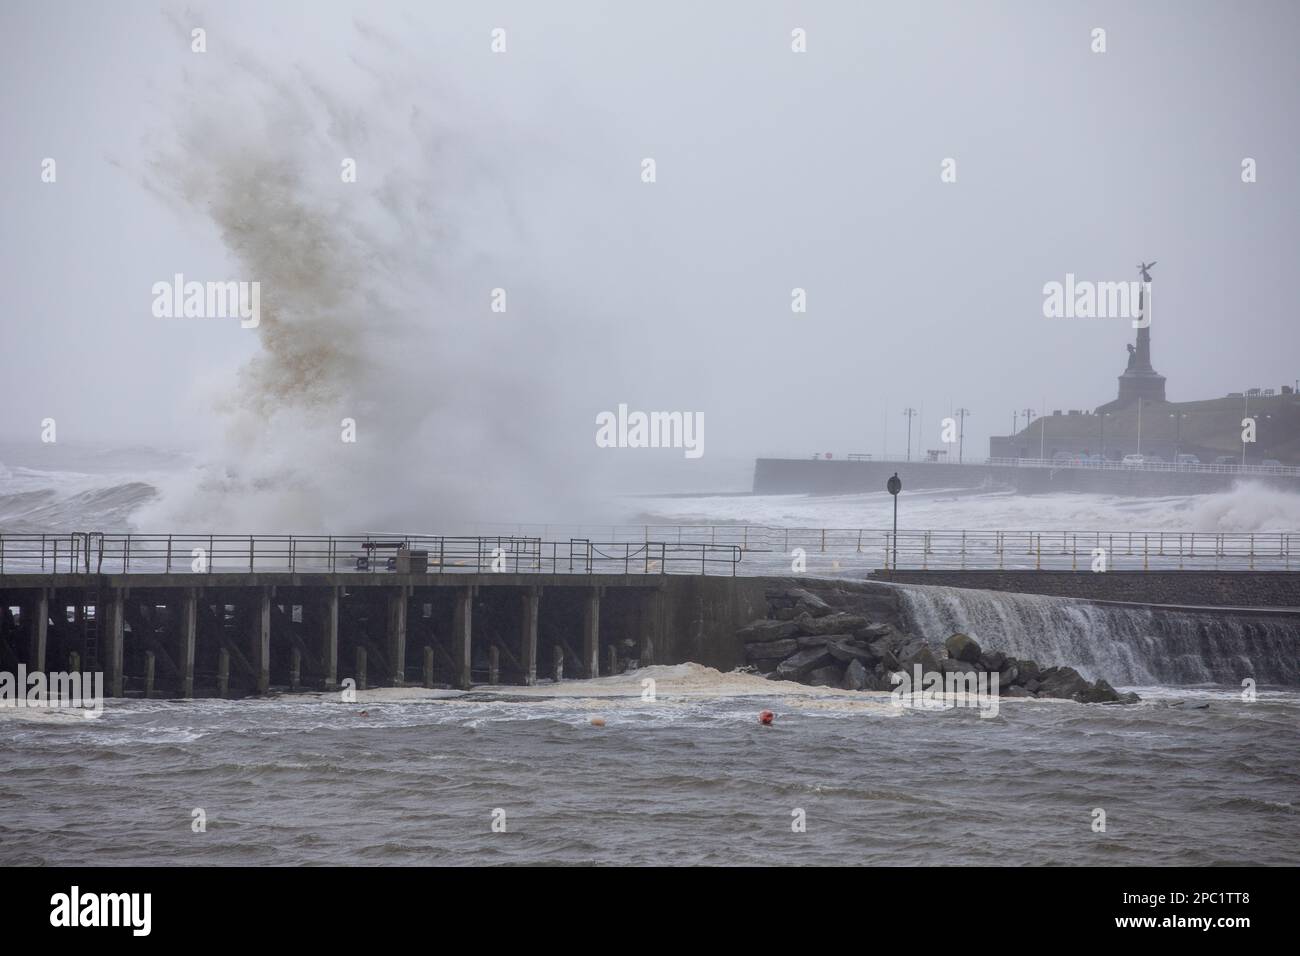 Aberystwyth, Ceredigion, Wales, UK. 13th March 2023 UK Weather: Strong winds, combined with incoming high tide brings large crashing waves along Aberystwyth sea defences this morning. © Ian Jones/Alamy Live News Stock Photo